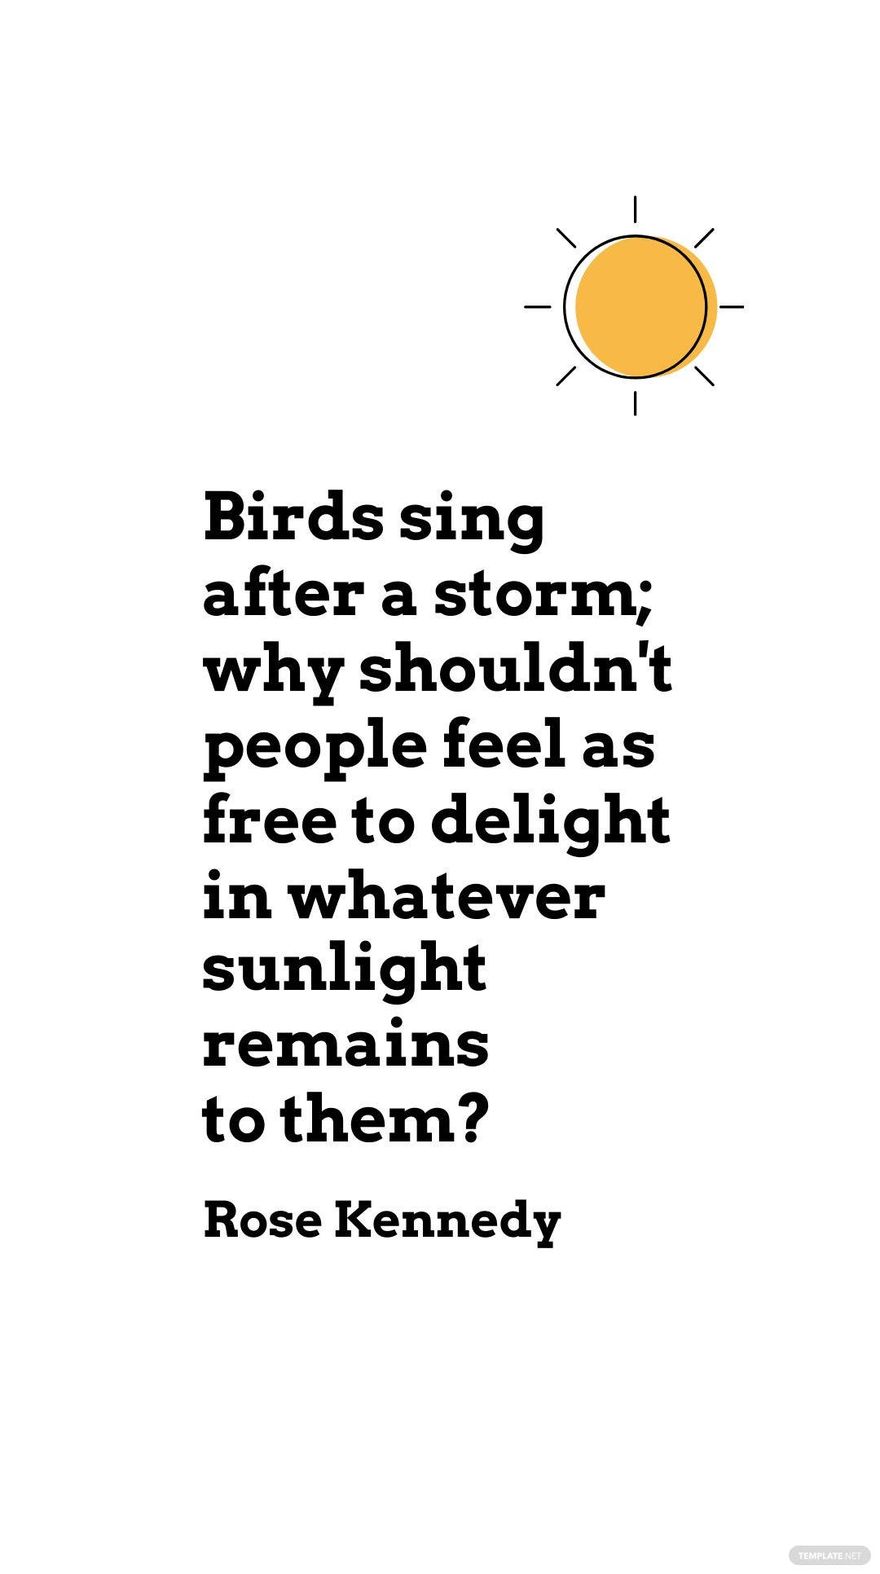 Rose Kennedy - Birds sing after a storm; why shouldn't people feel as to delight in whatever sunlight remains to them?